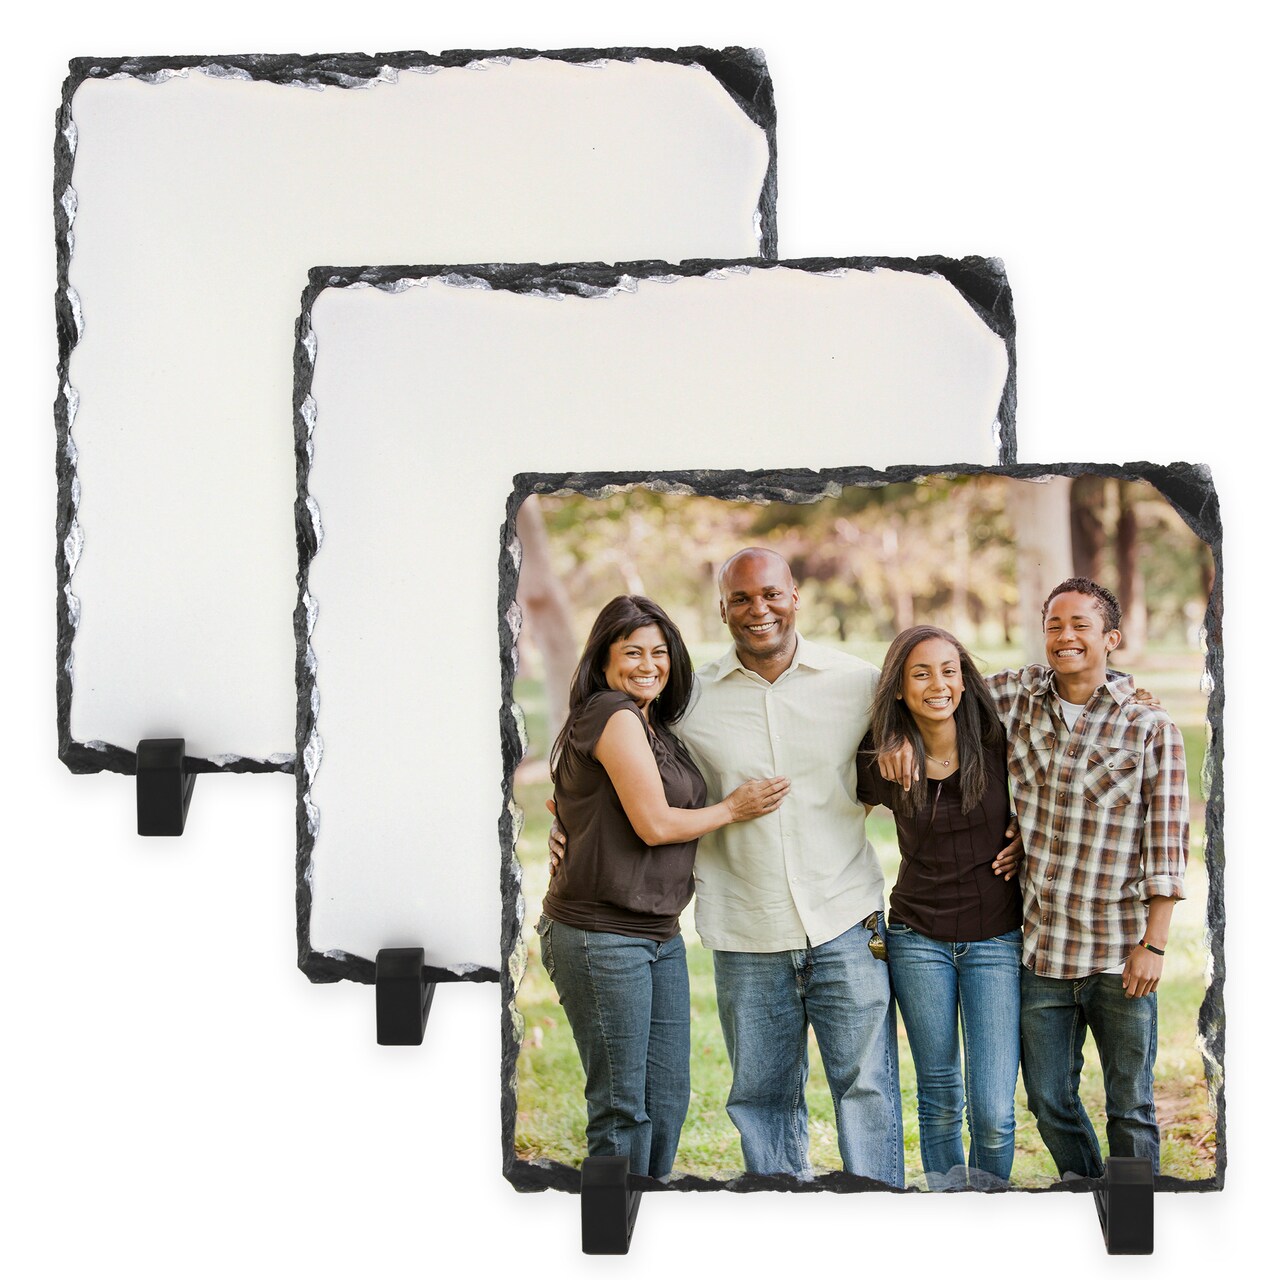 SubliSLATE Sublimation Slate Blank, Square. Includes Black Display Feet for  Photo Quality Sublimation Printing